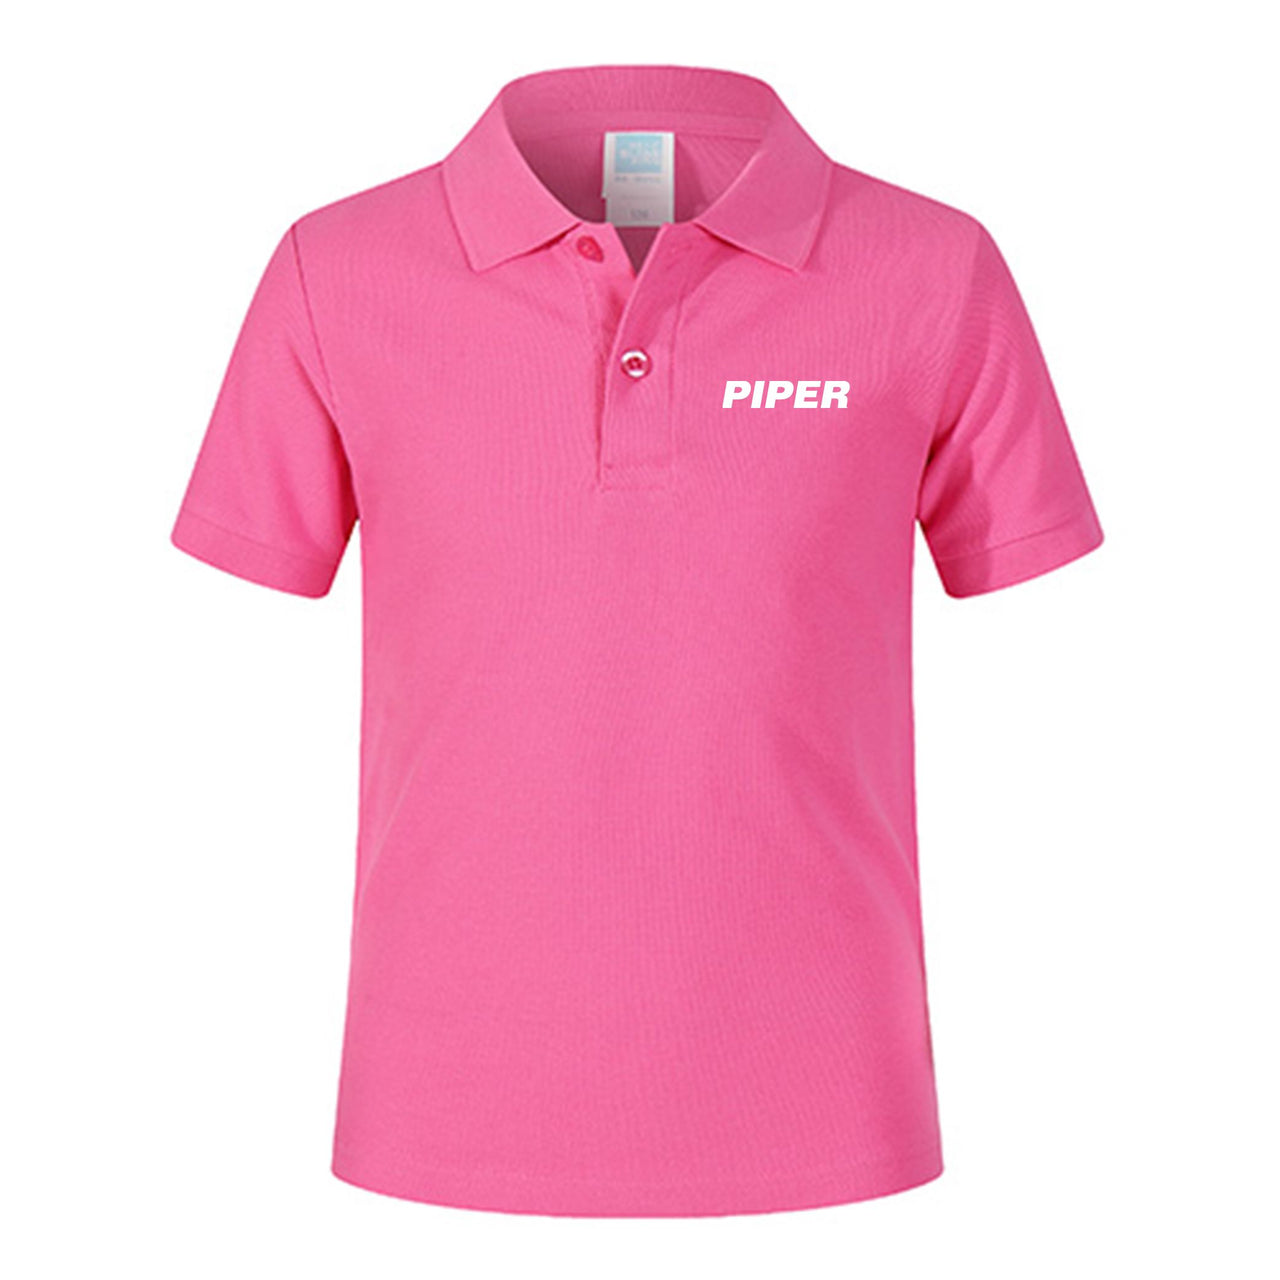 Piper & Text Designed Children Polo T-Shirts